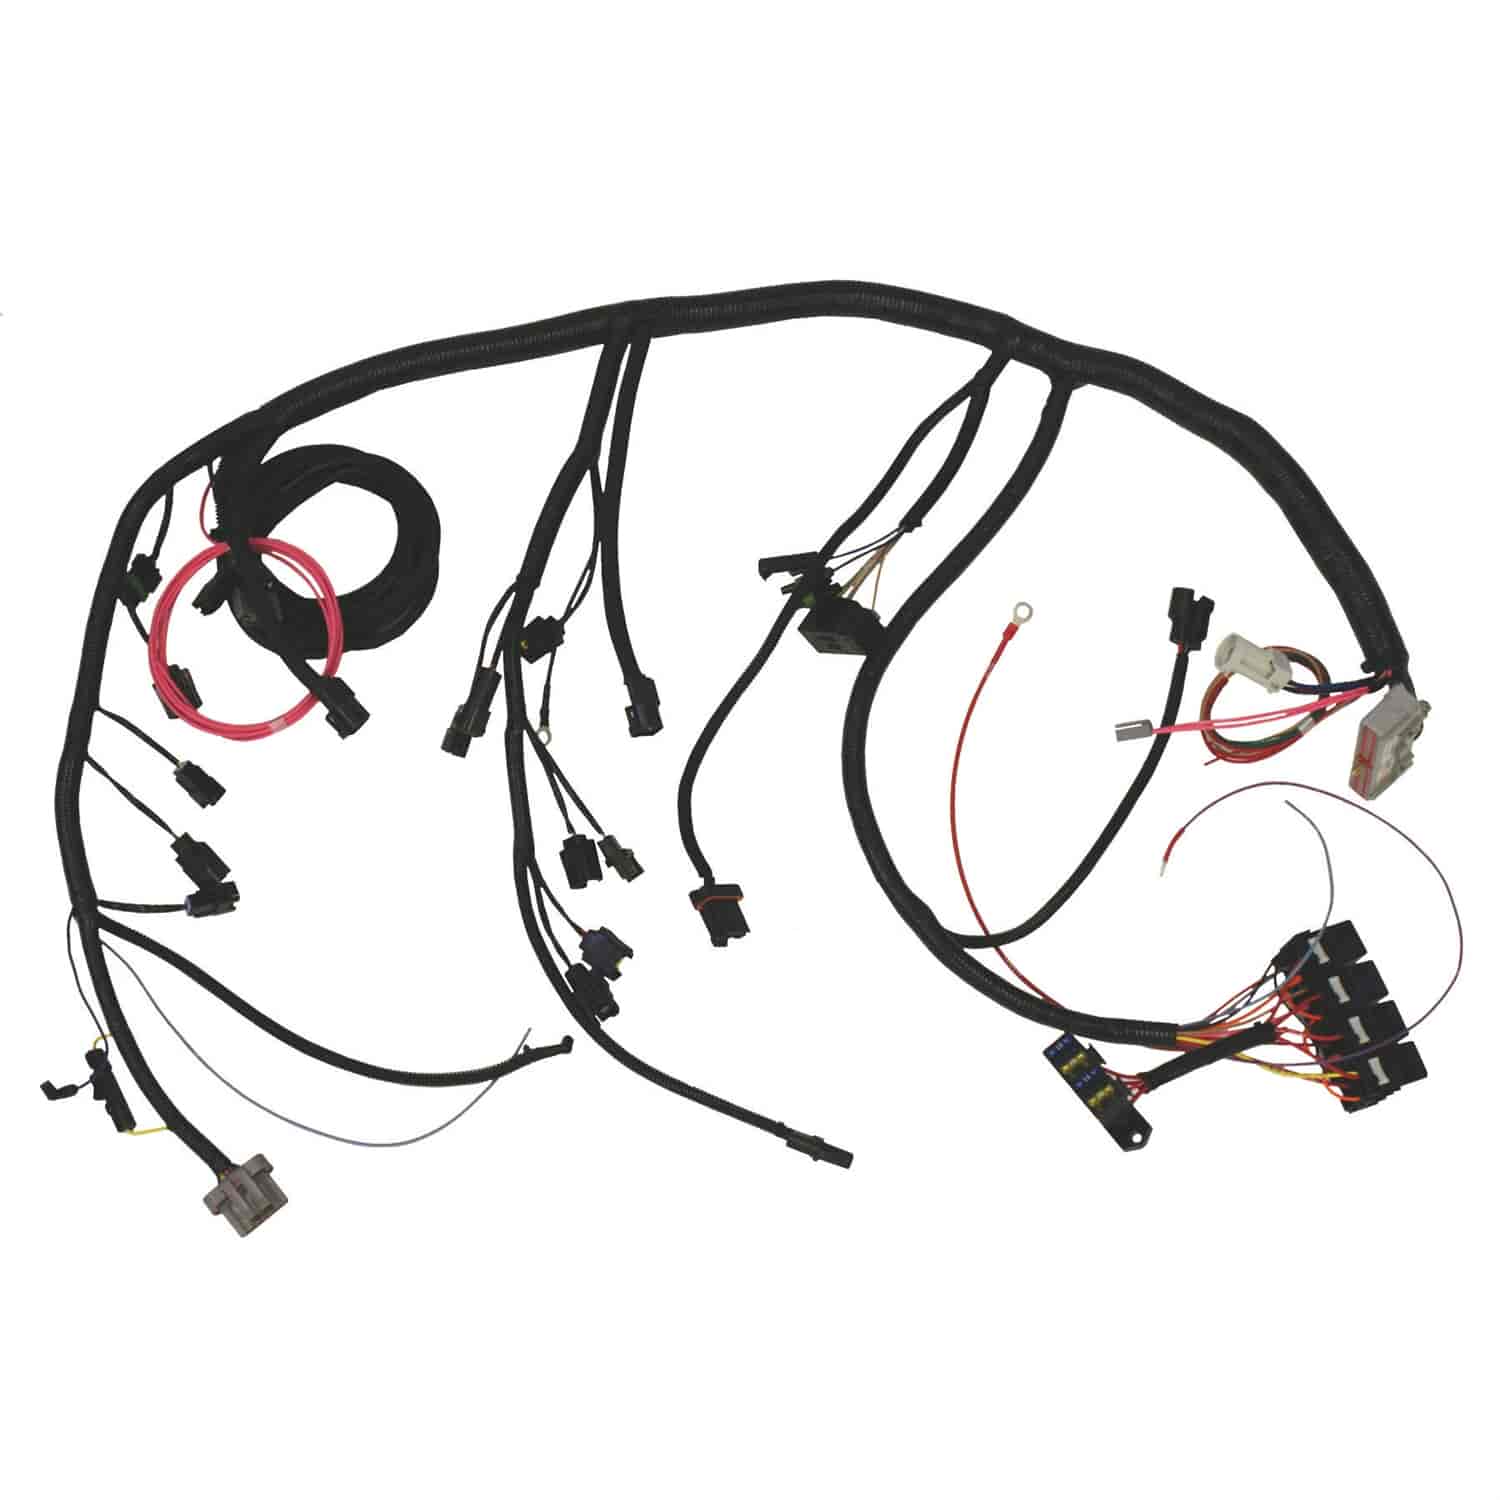 Mass Air Flow/Fuel Injection Harness Ford Mustang & Bronco 302-351